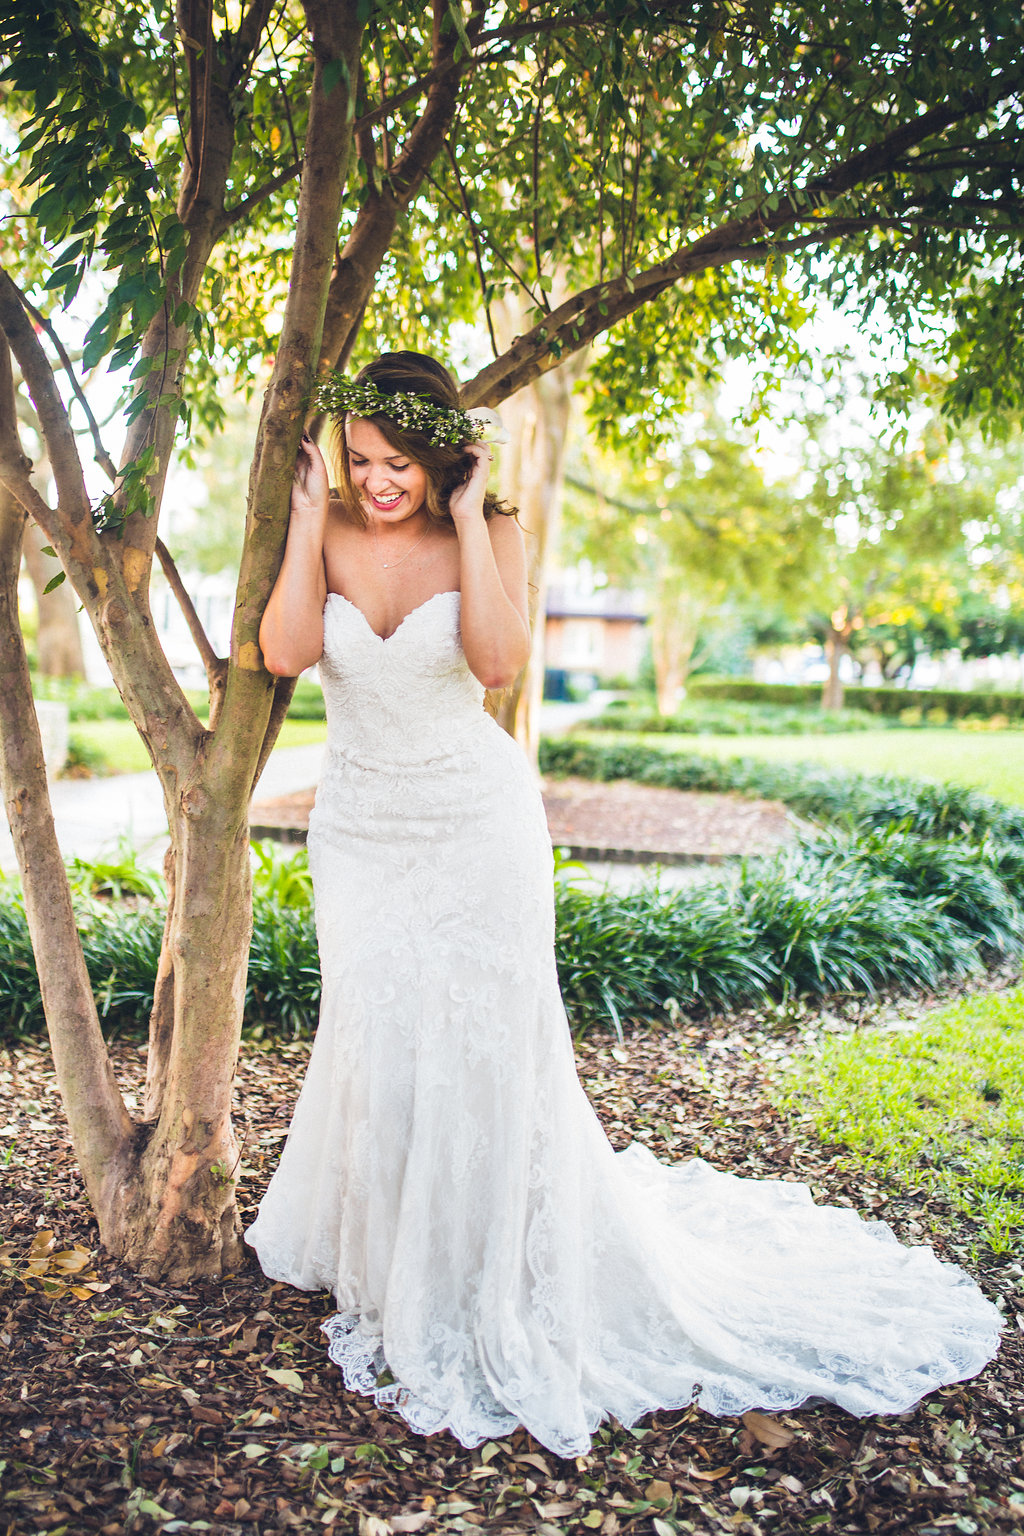 Alexis Sweet & Maggie Sottero — Ivory & Beau